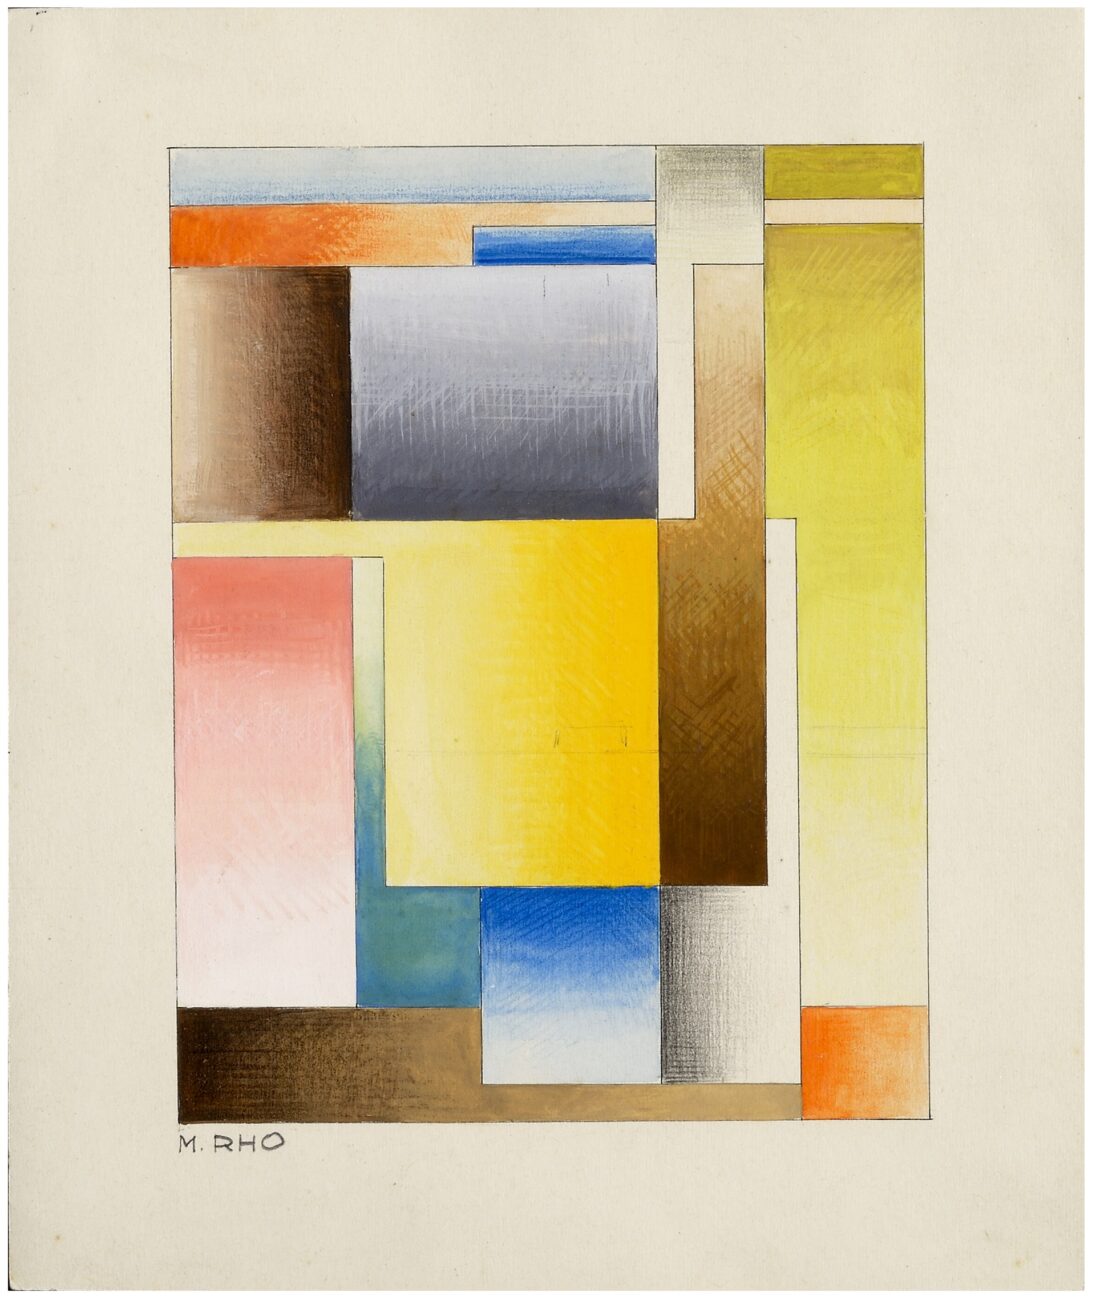 Manlio Rho, Untitled (Composition), 1937–38